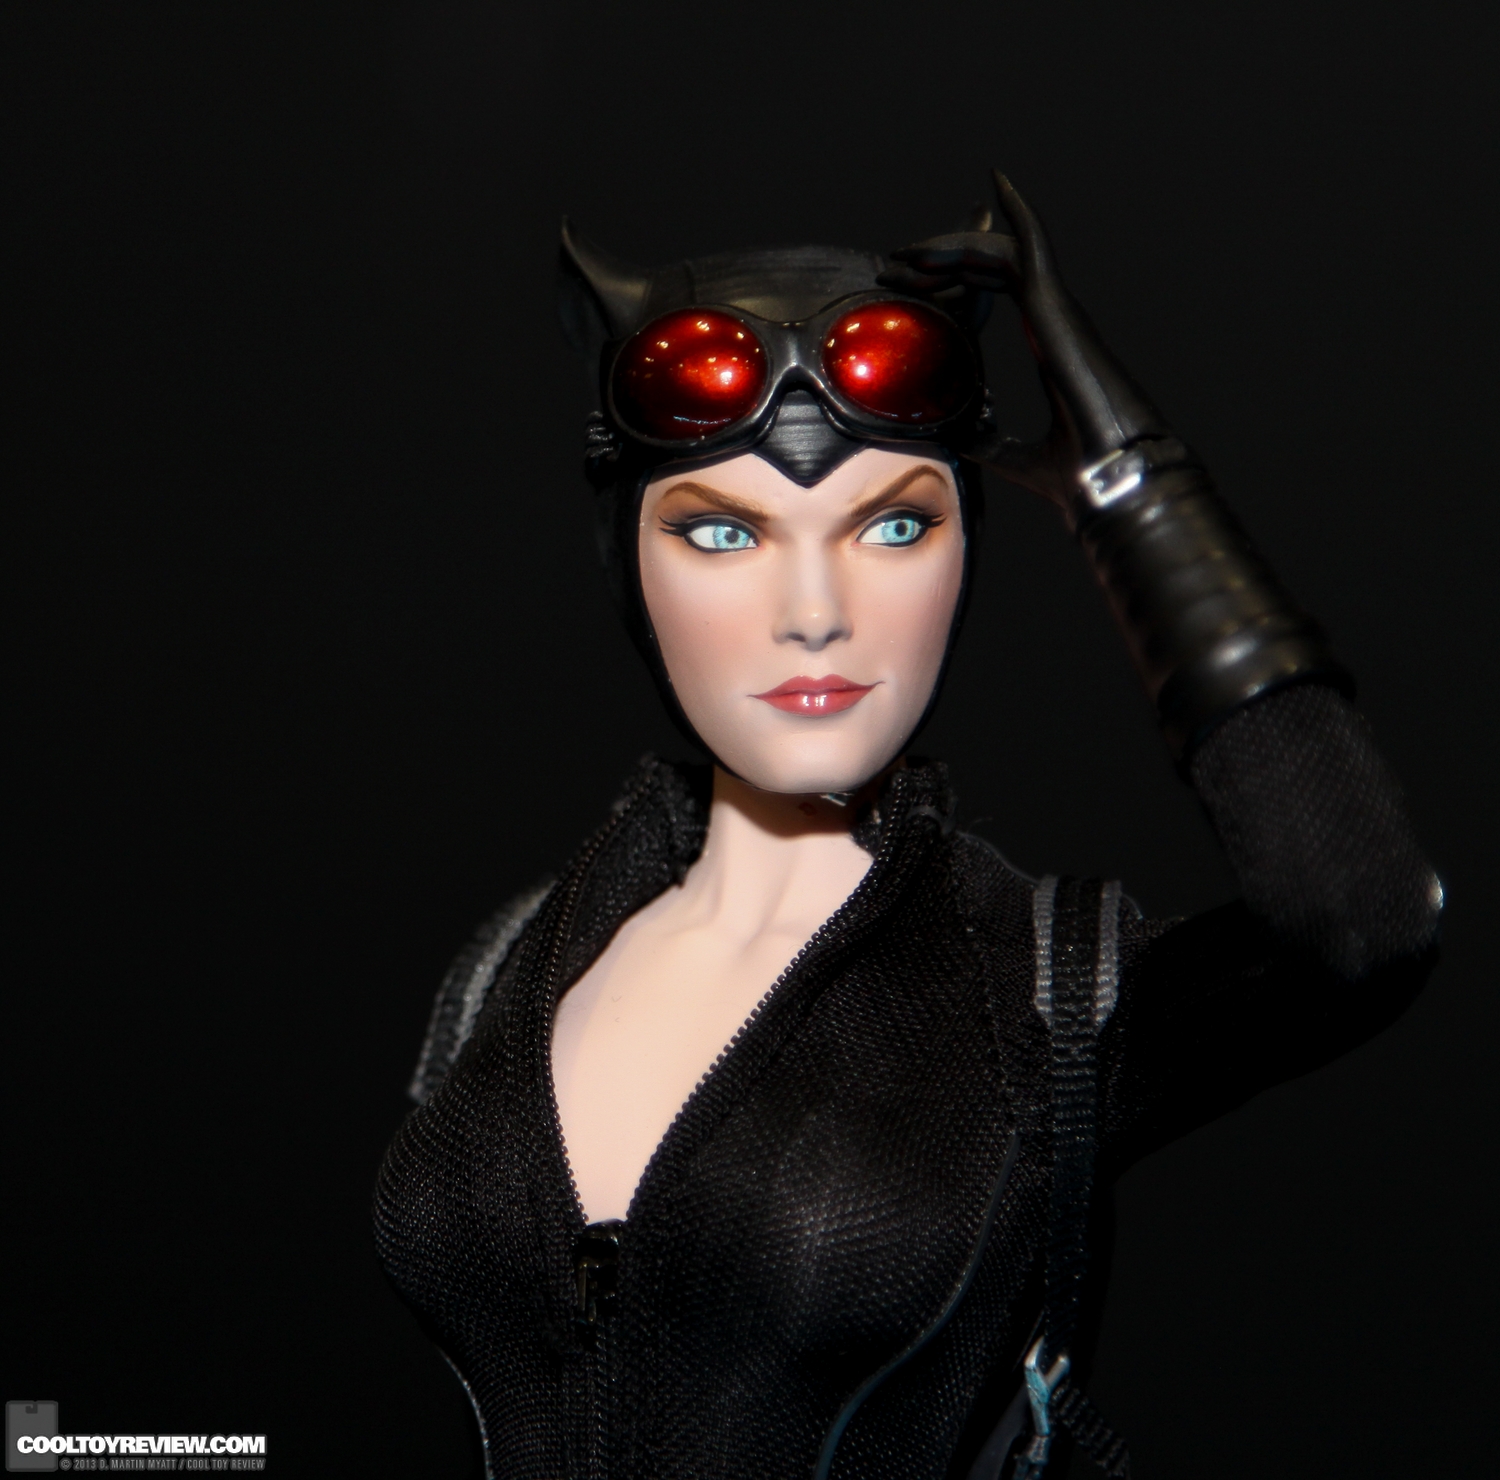 SDCC_2013_Sideshow_Collectibles_Wed-033.jpg